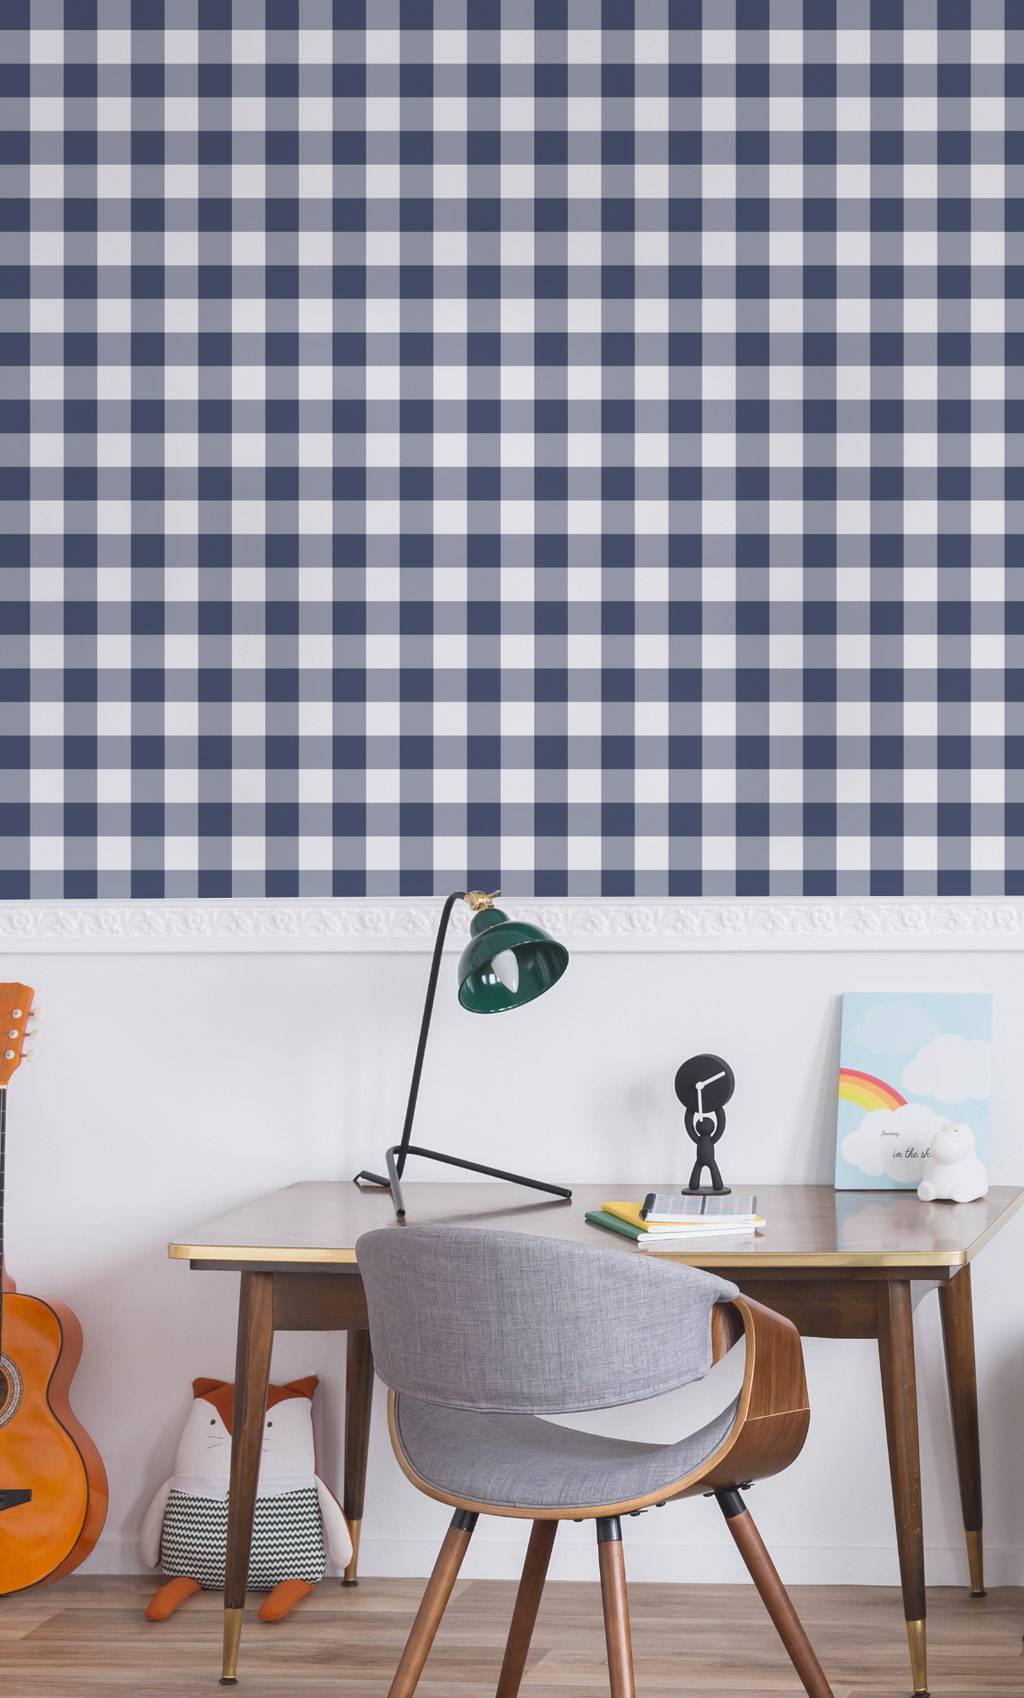 Blue bell  Check This wallcovering from Nilaya by Asian Paints